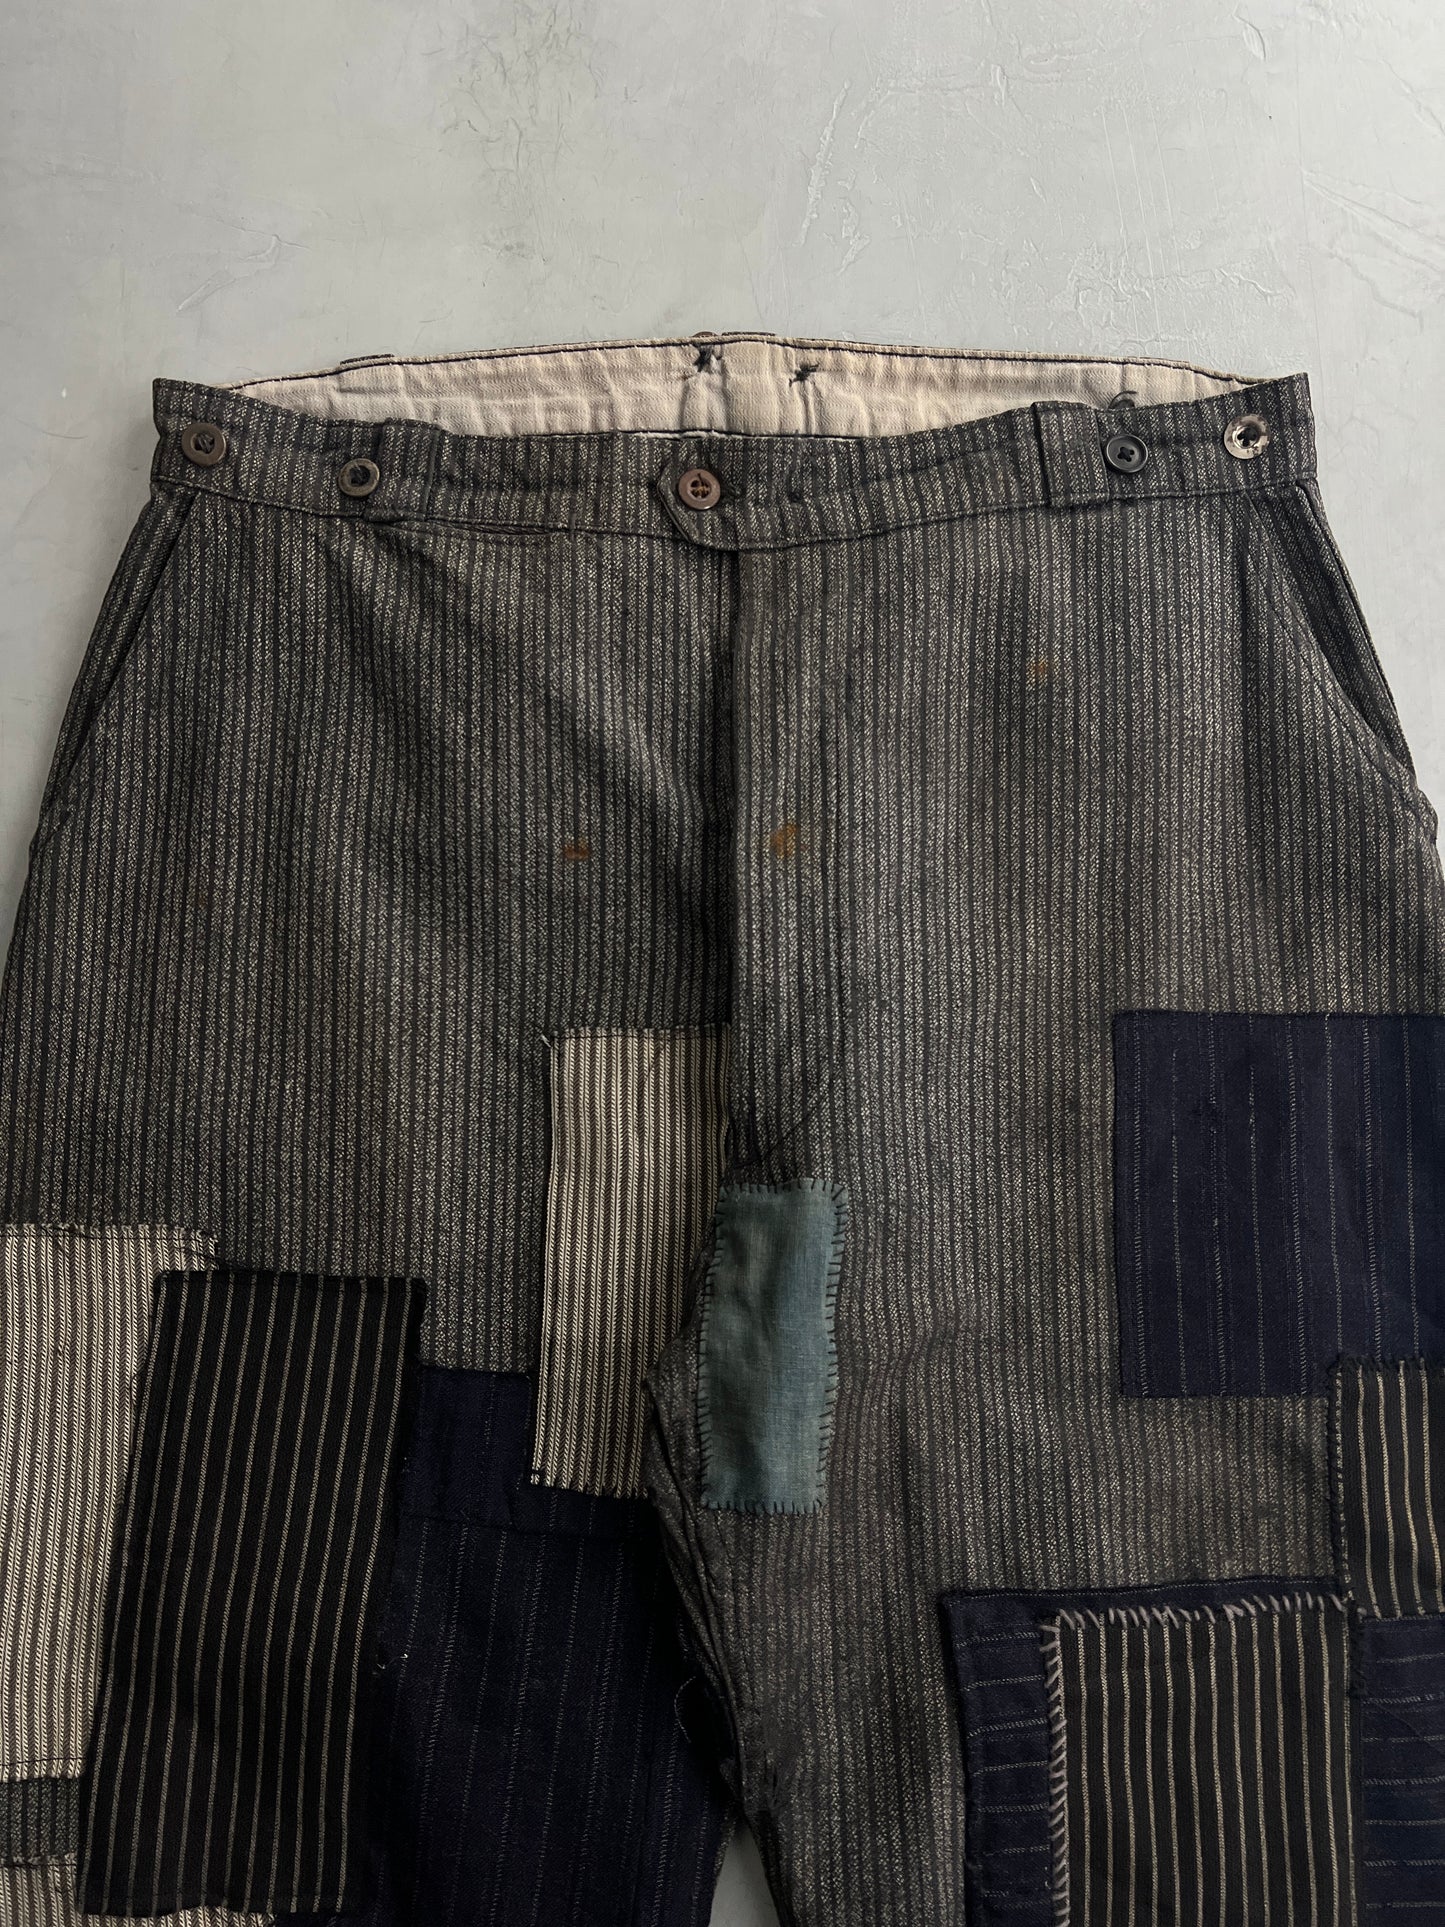 40's French Patched Work Pants [37"]